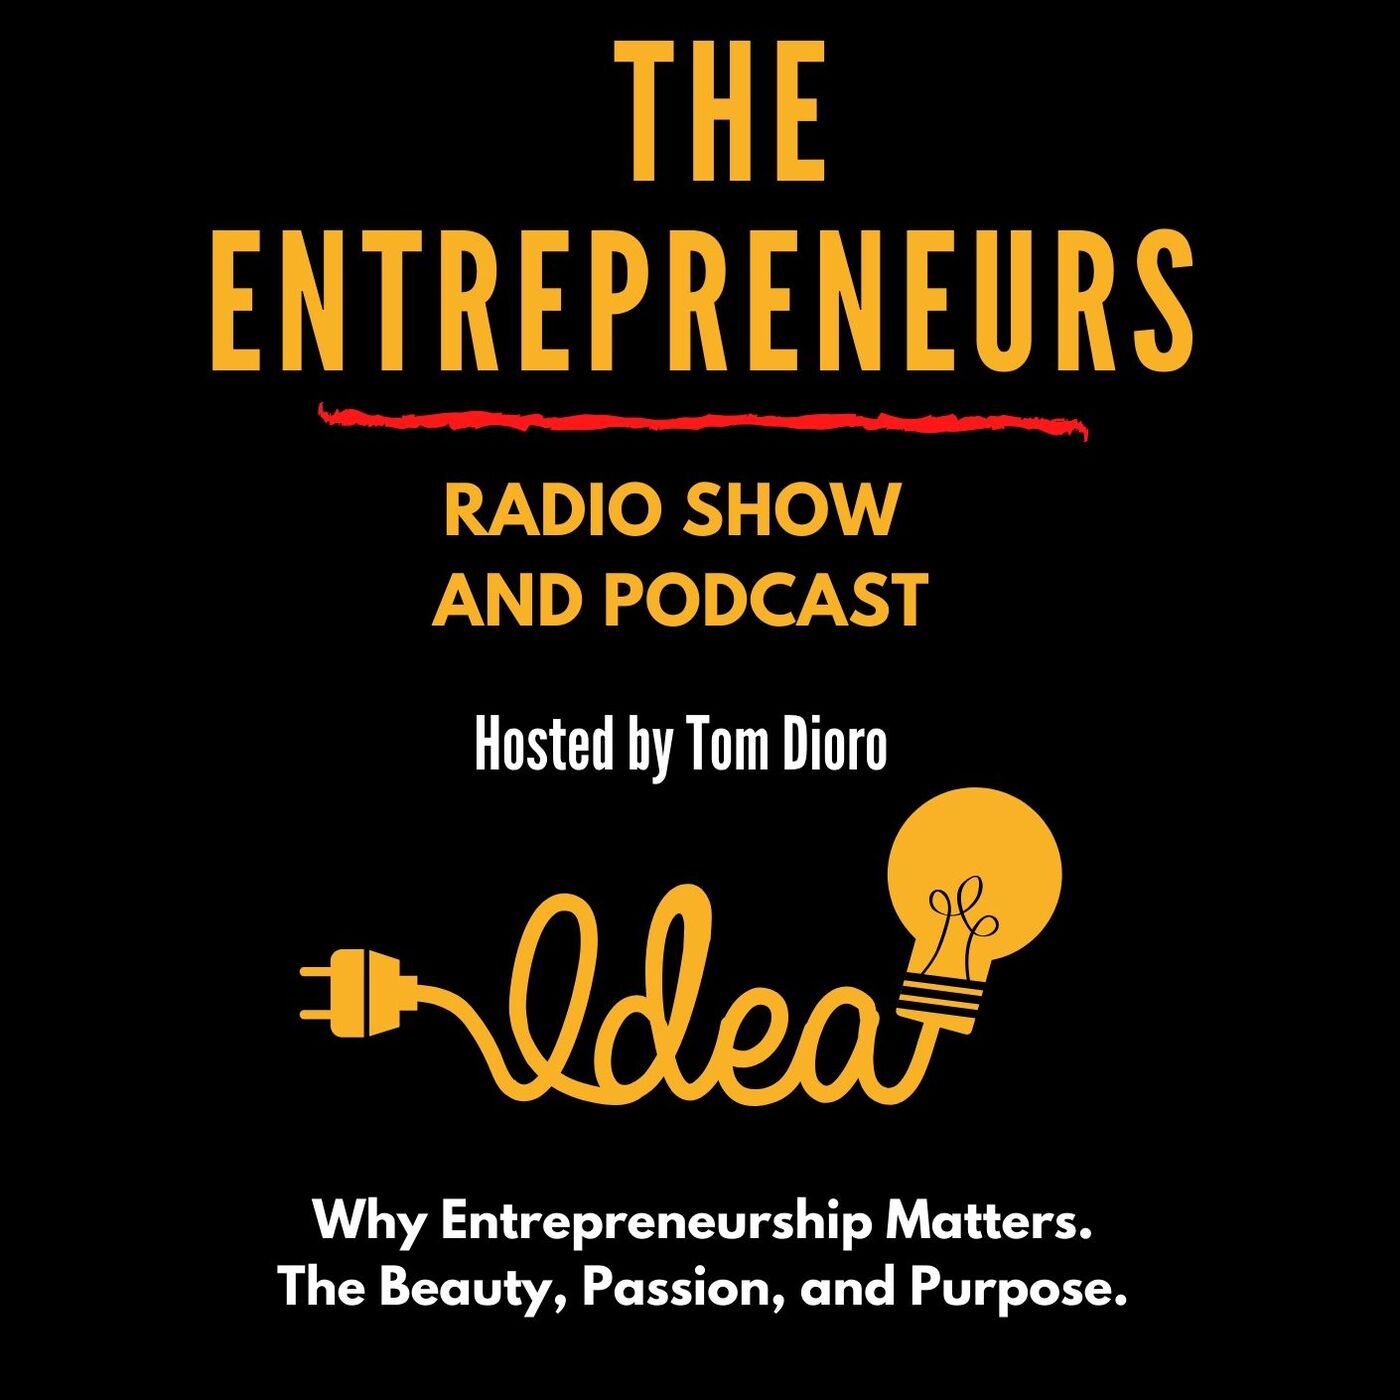 The Entrepreneurs Radio Show and Podcast